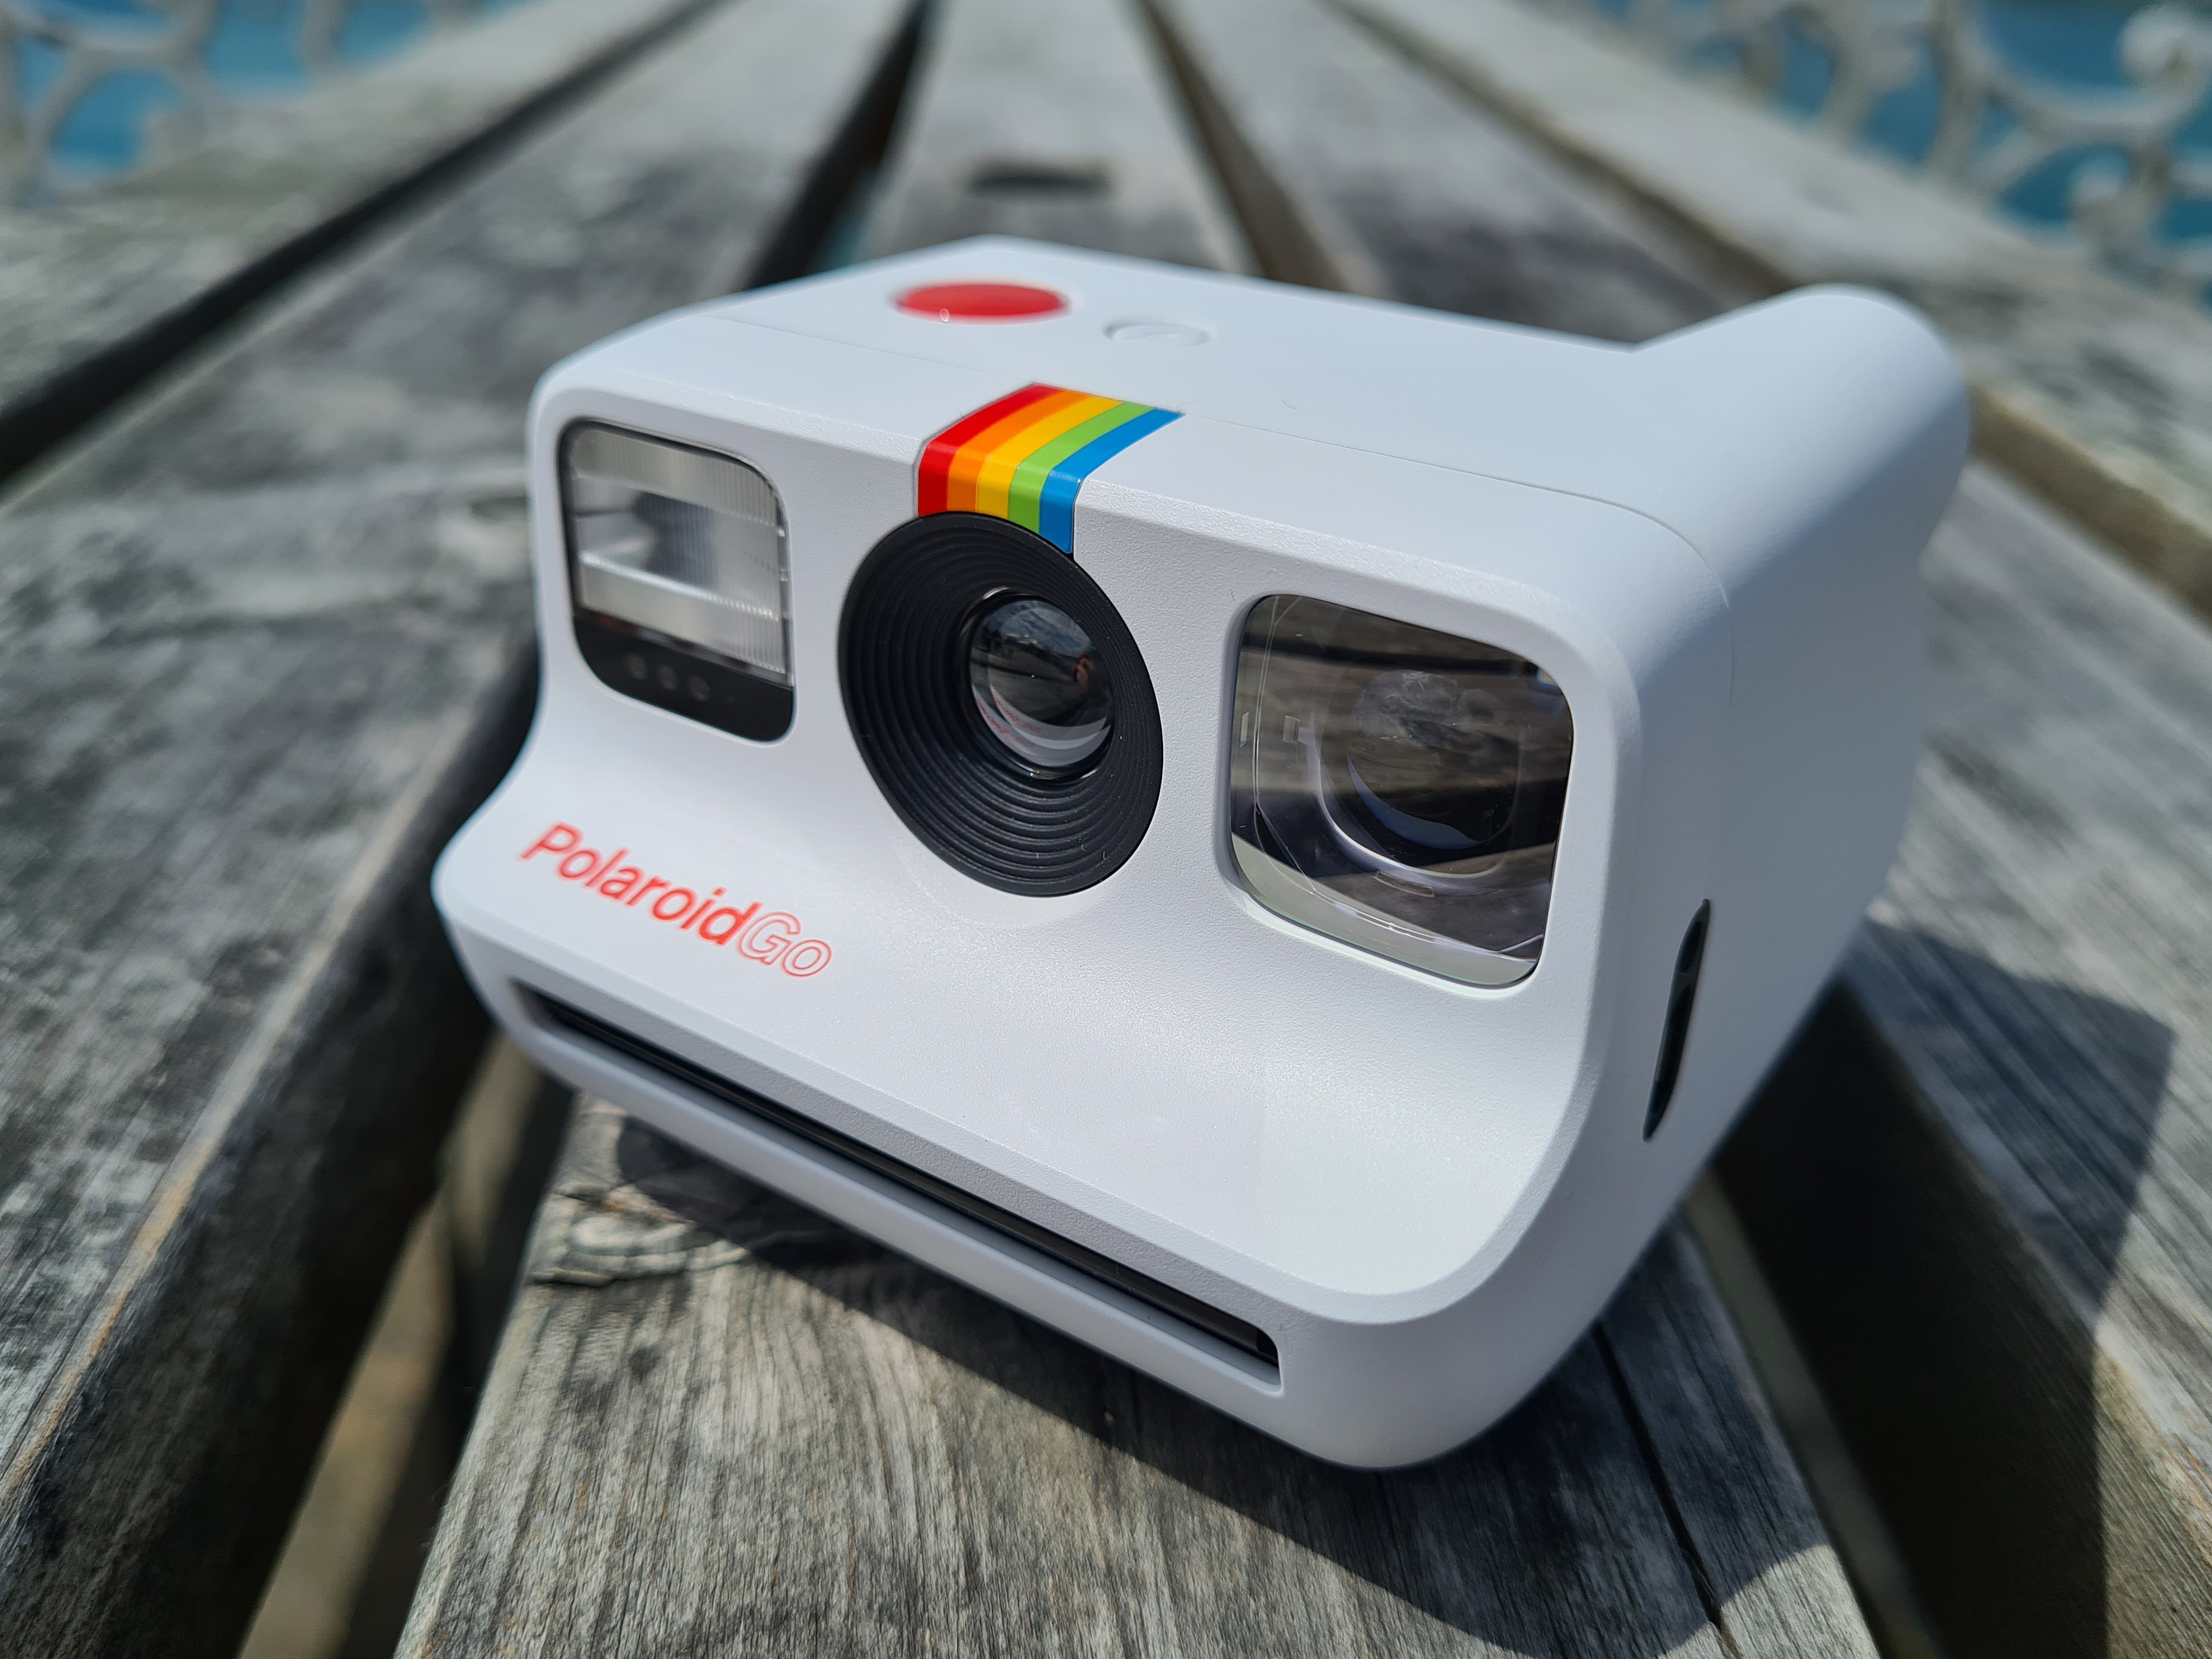 The Polaroid Go Is The World's Smallest Instant Analog Camera